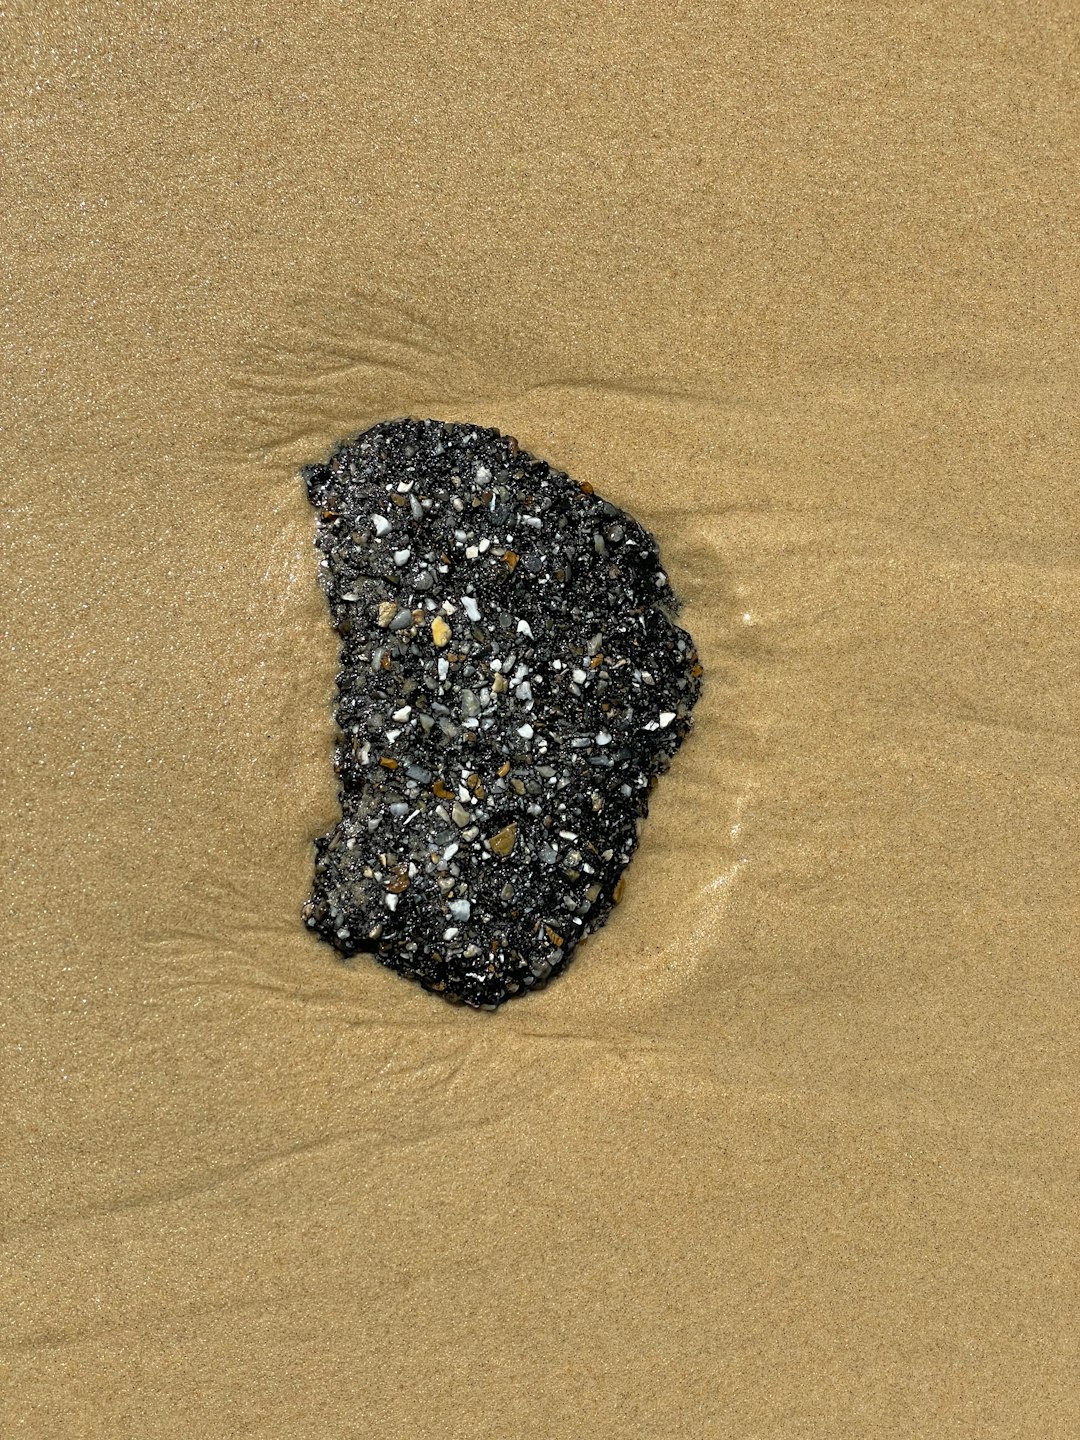 black and white stone on brown sand